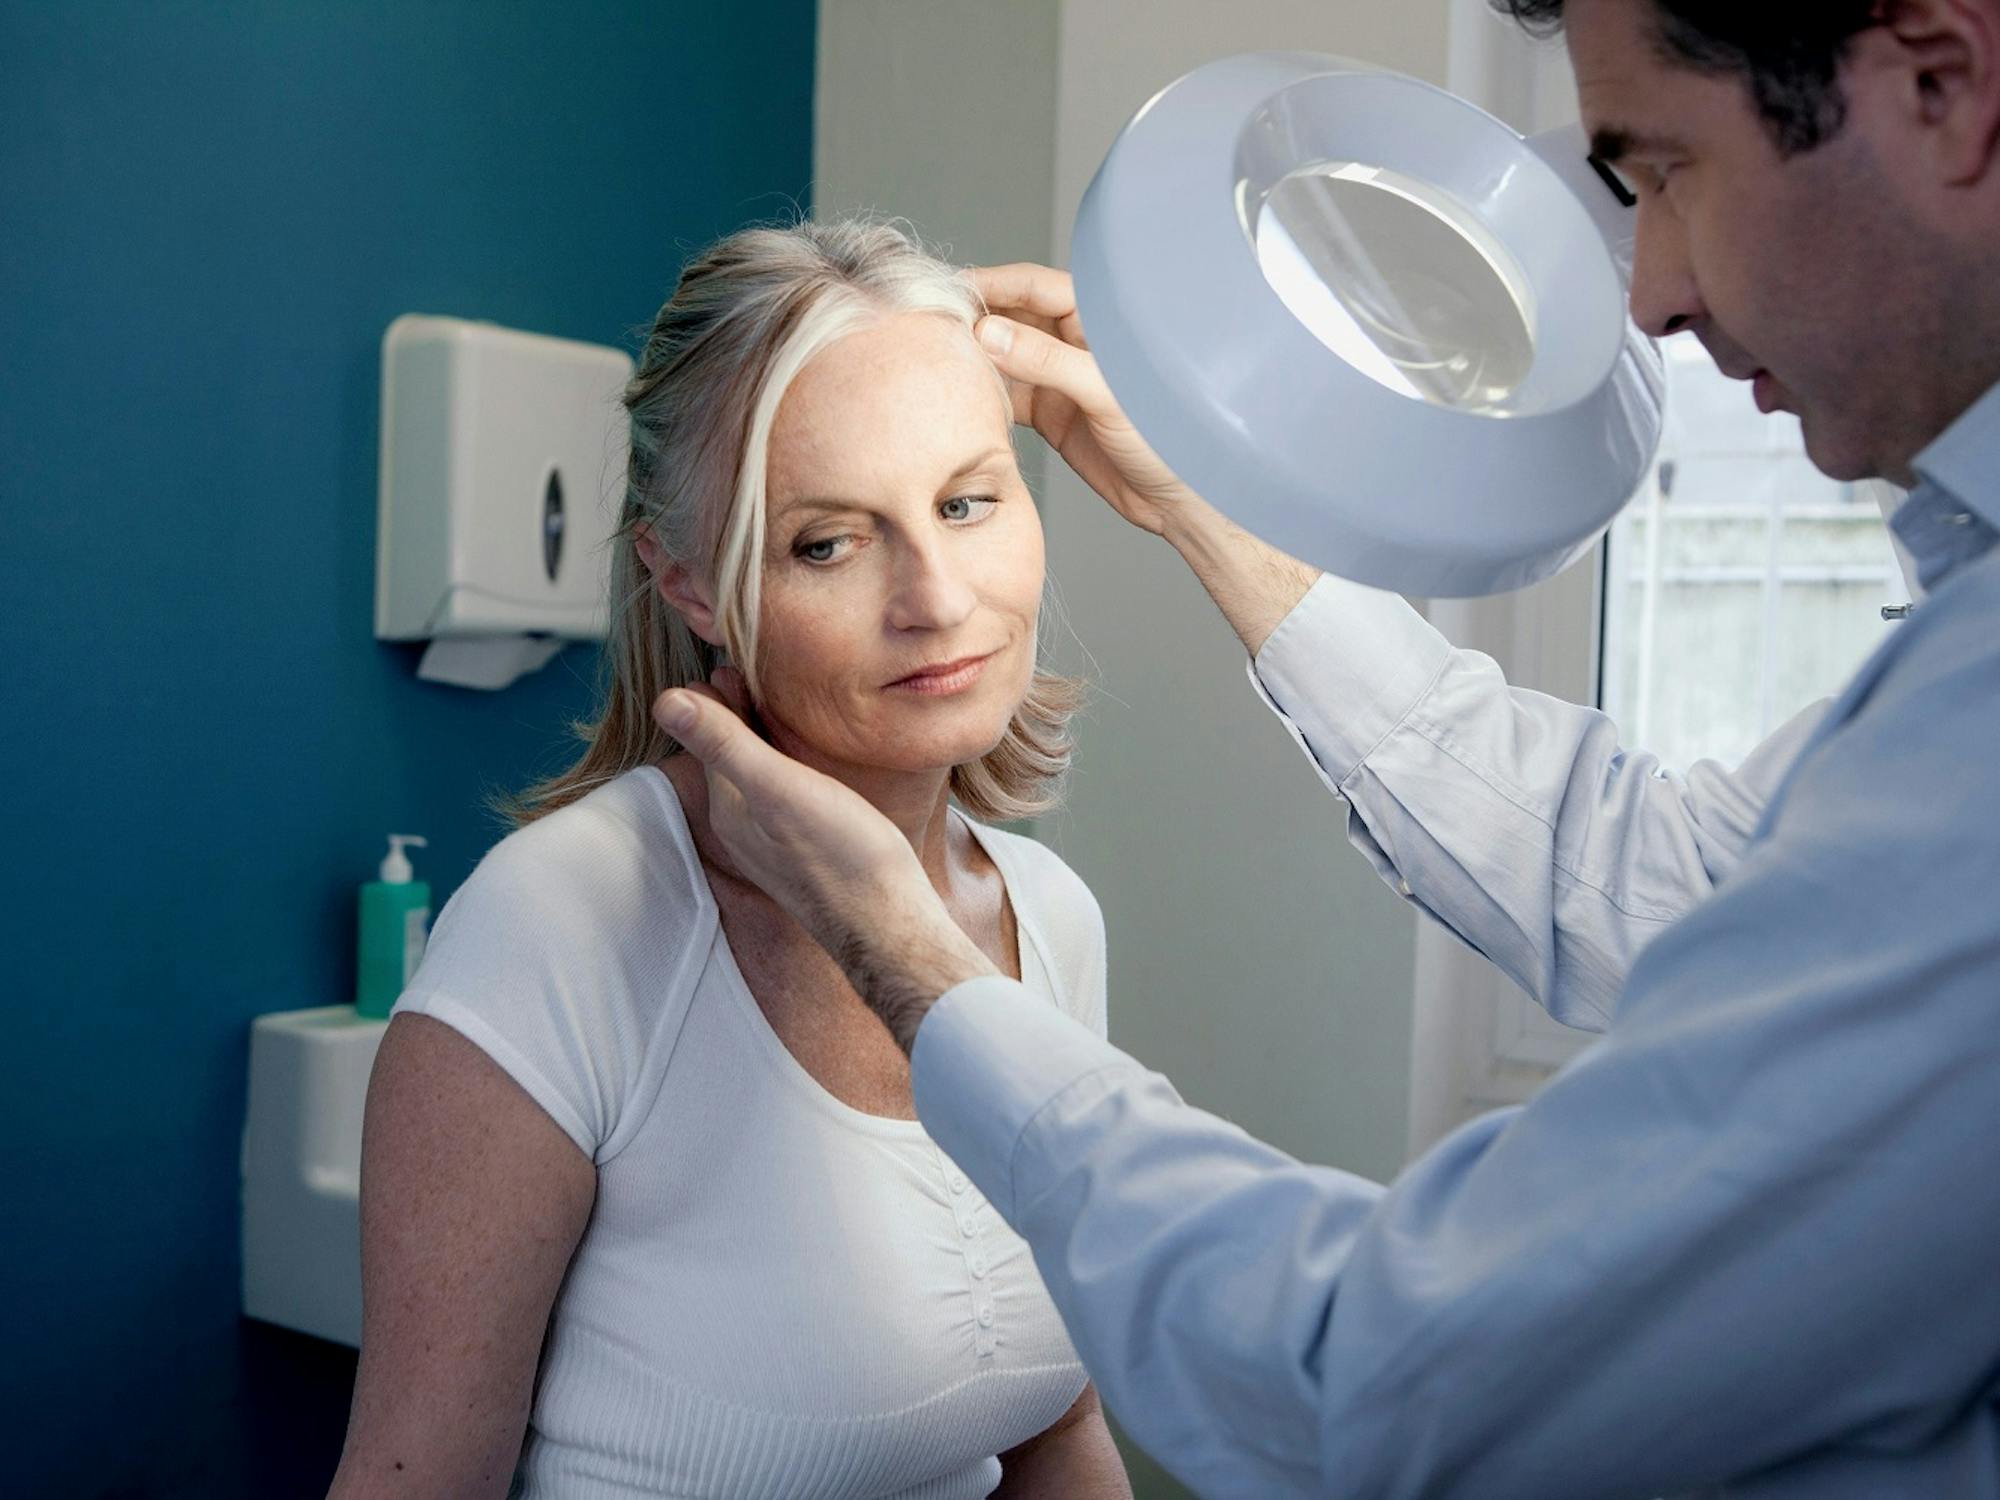 Does Medicare Cover Skin Cancer Screening?